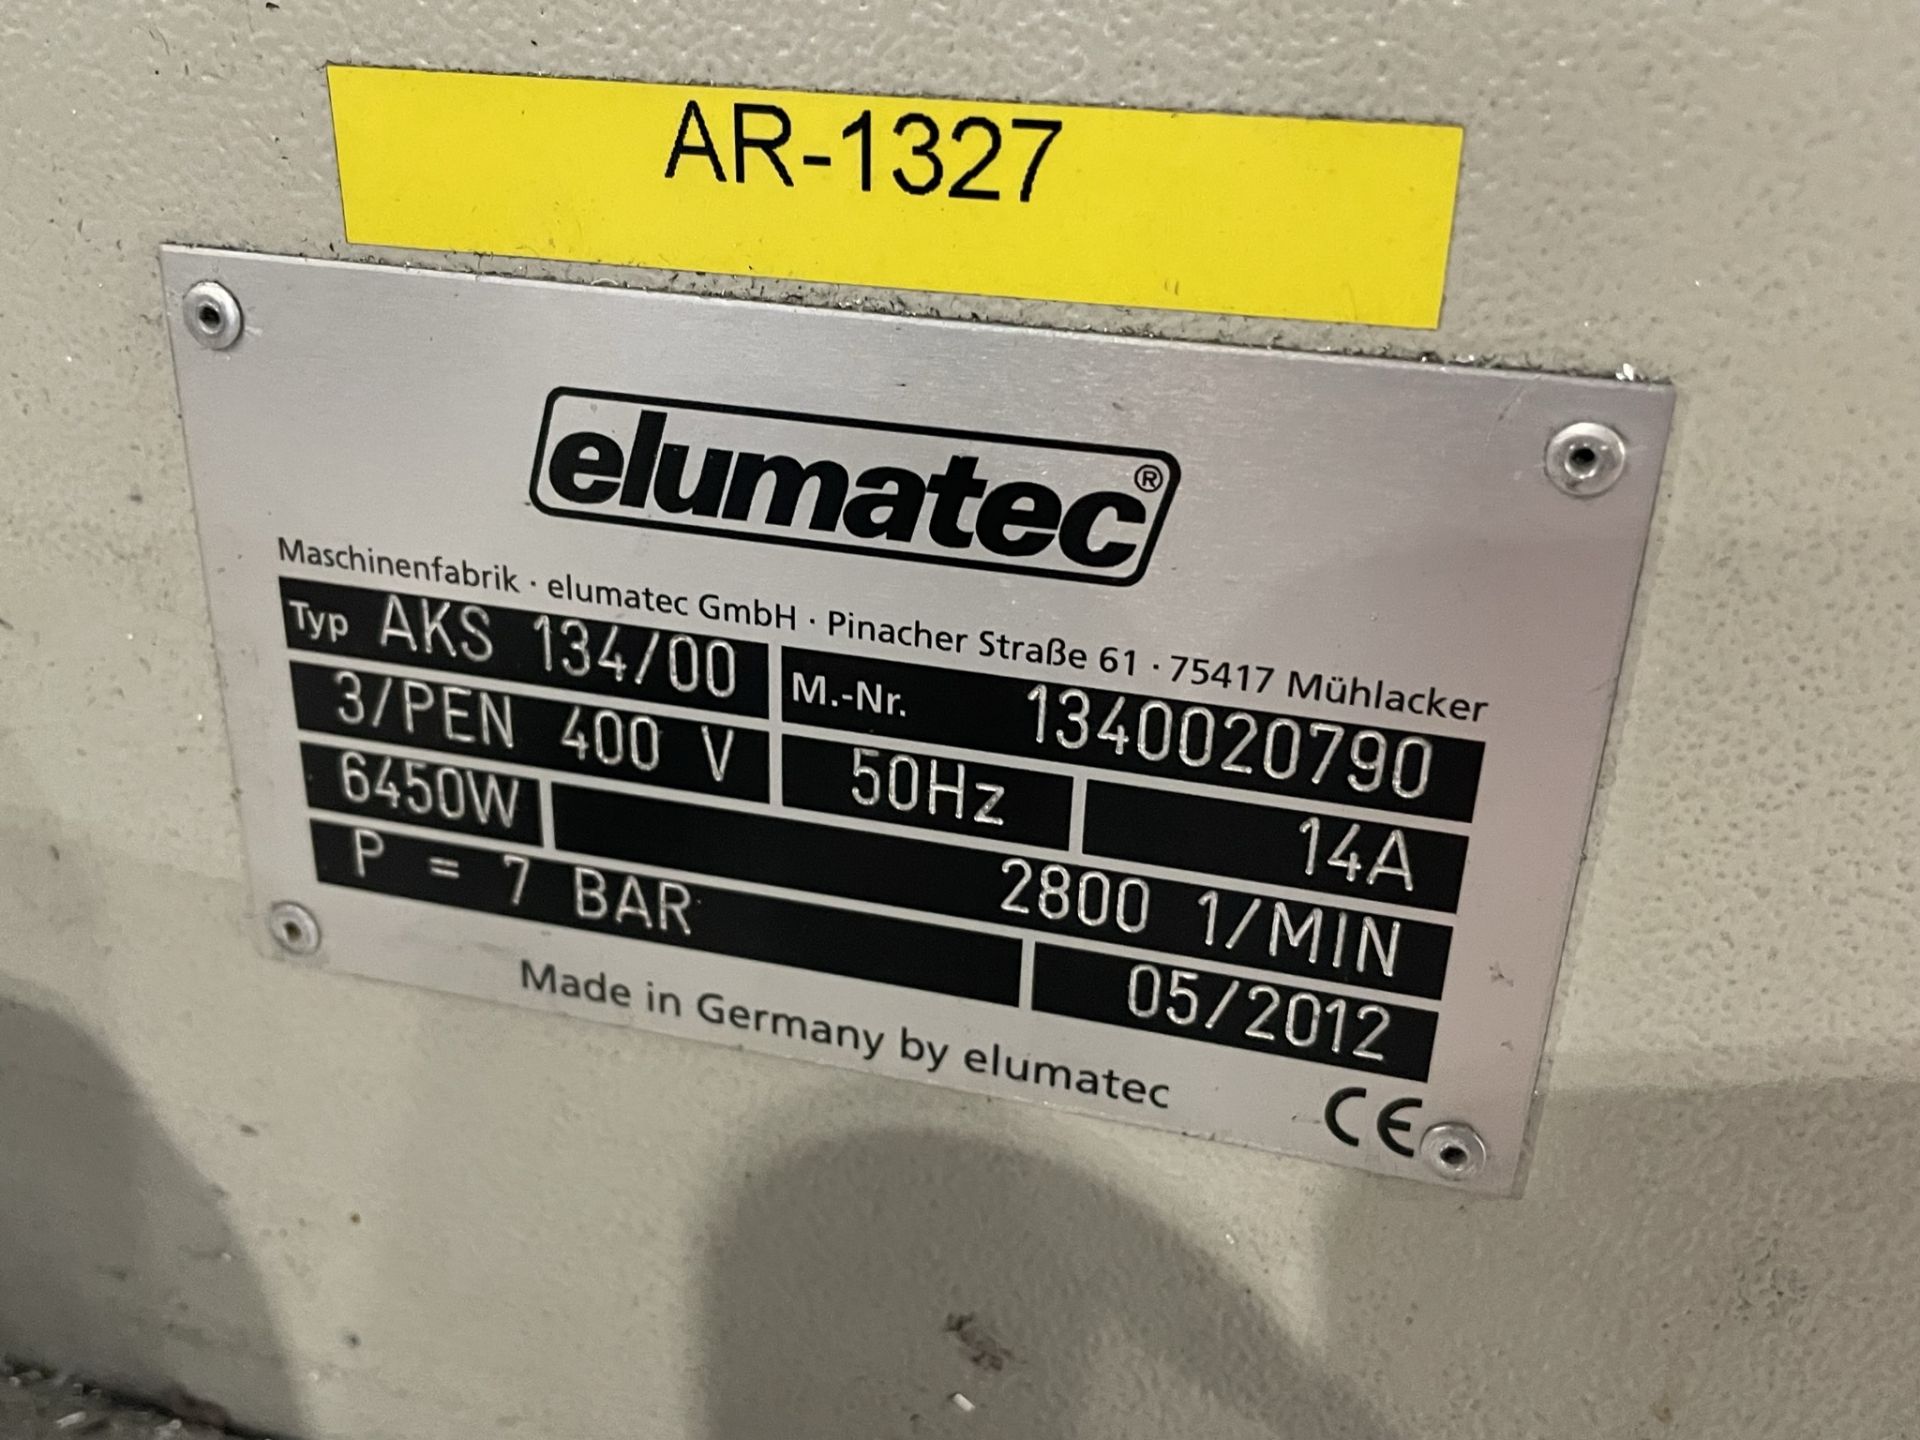 Elumatec, AKS134/00 end milling and notching saw, Serial No. 1340020790 (DOM: 2012) and 2x (no.) - Image 8 of 8